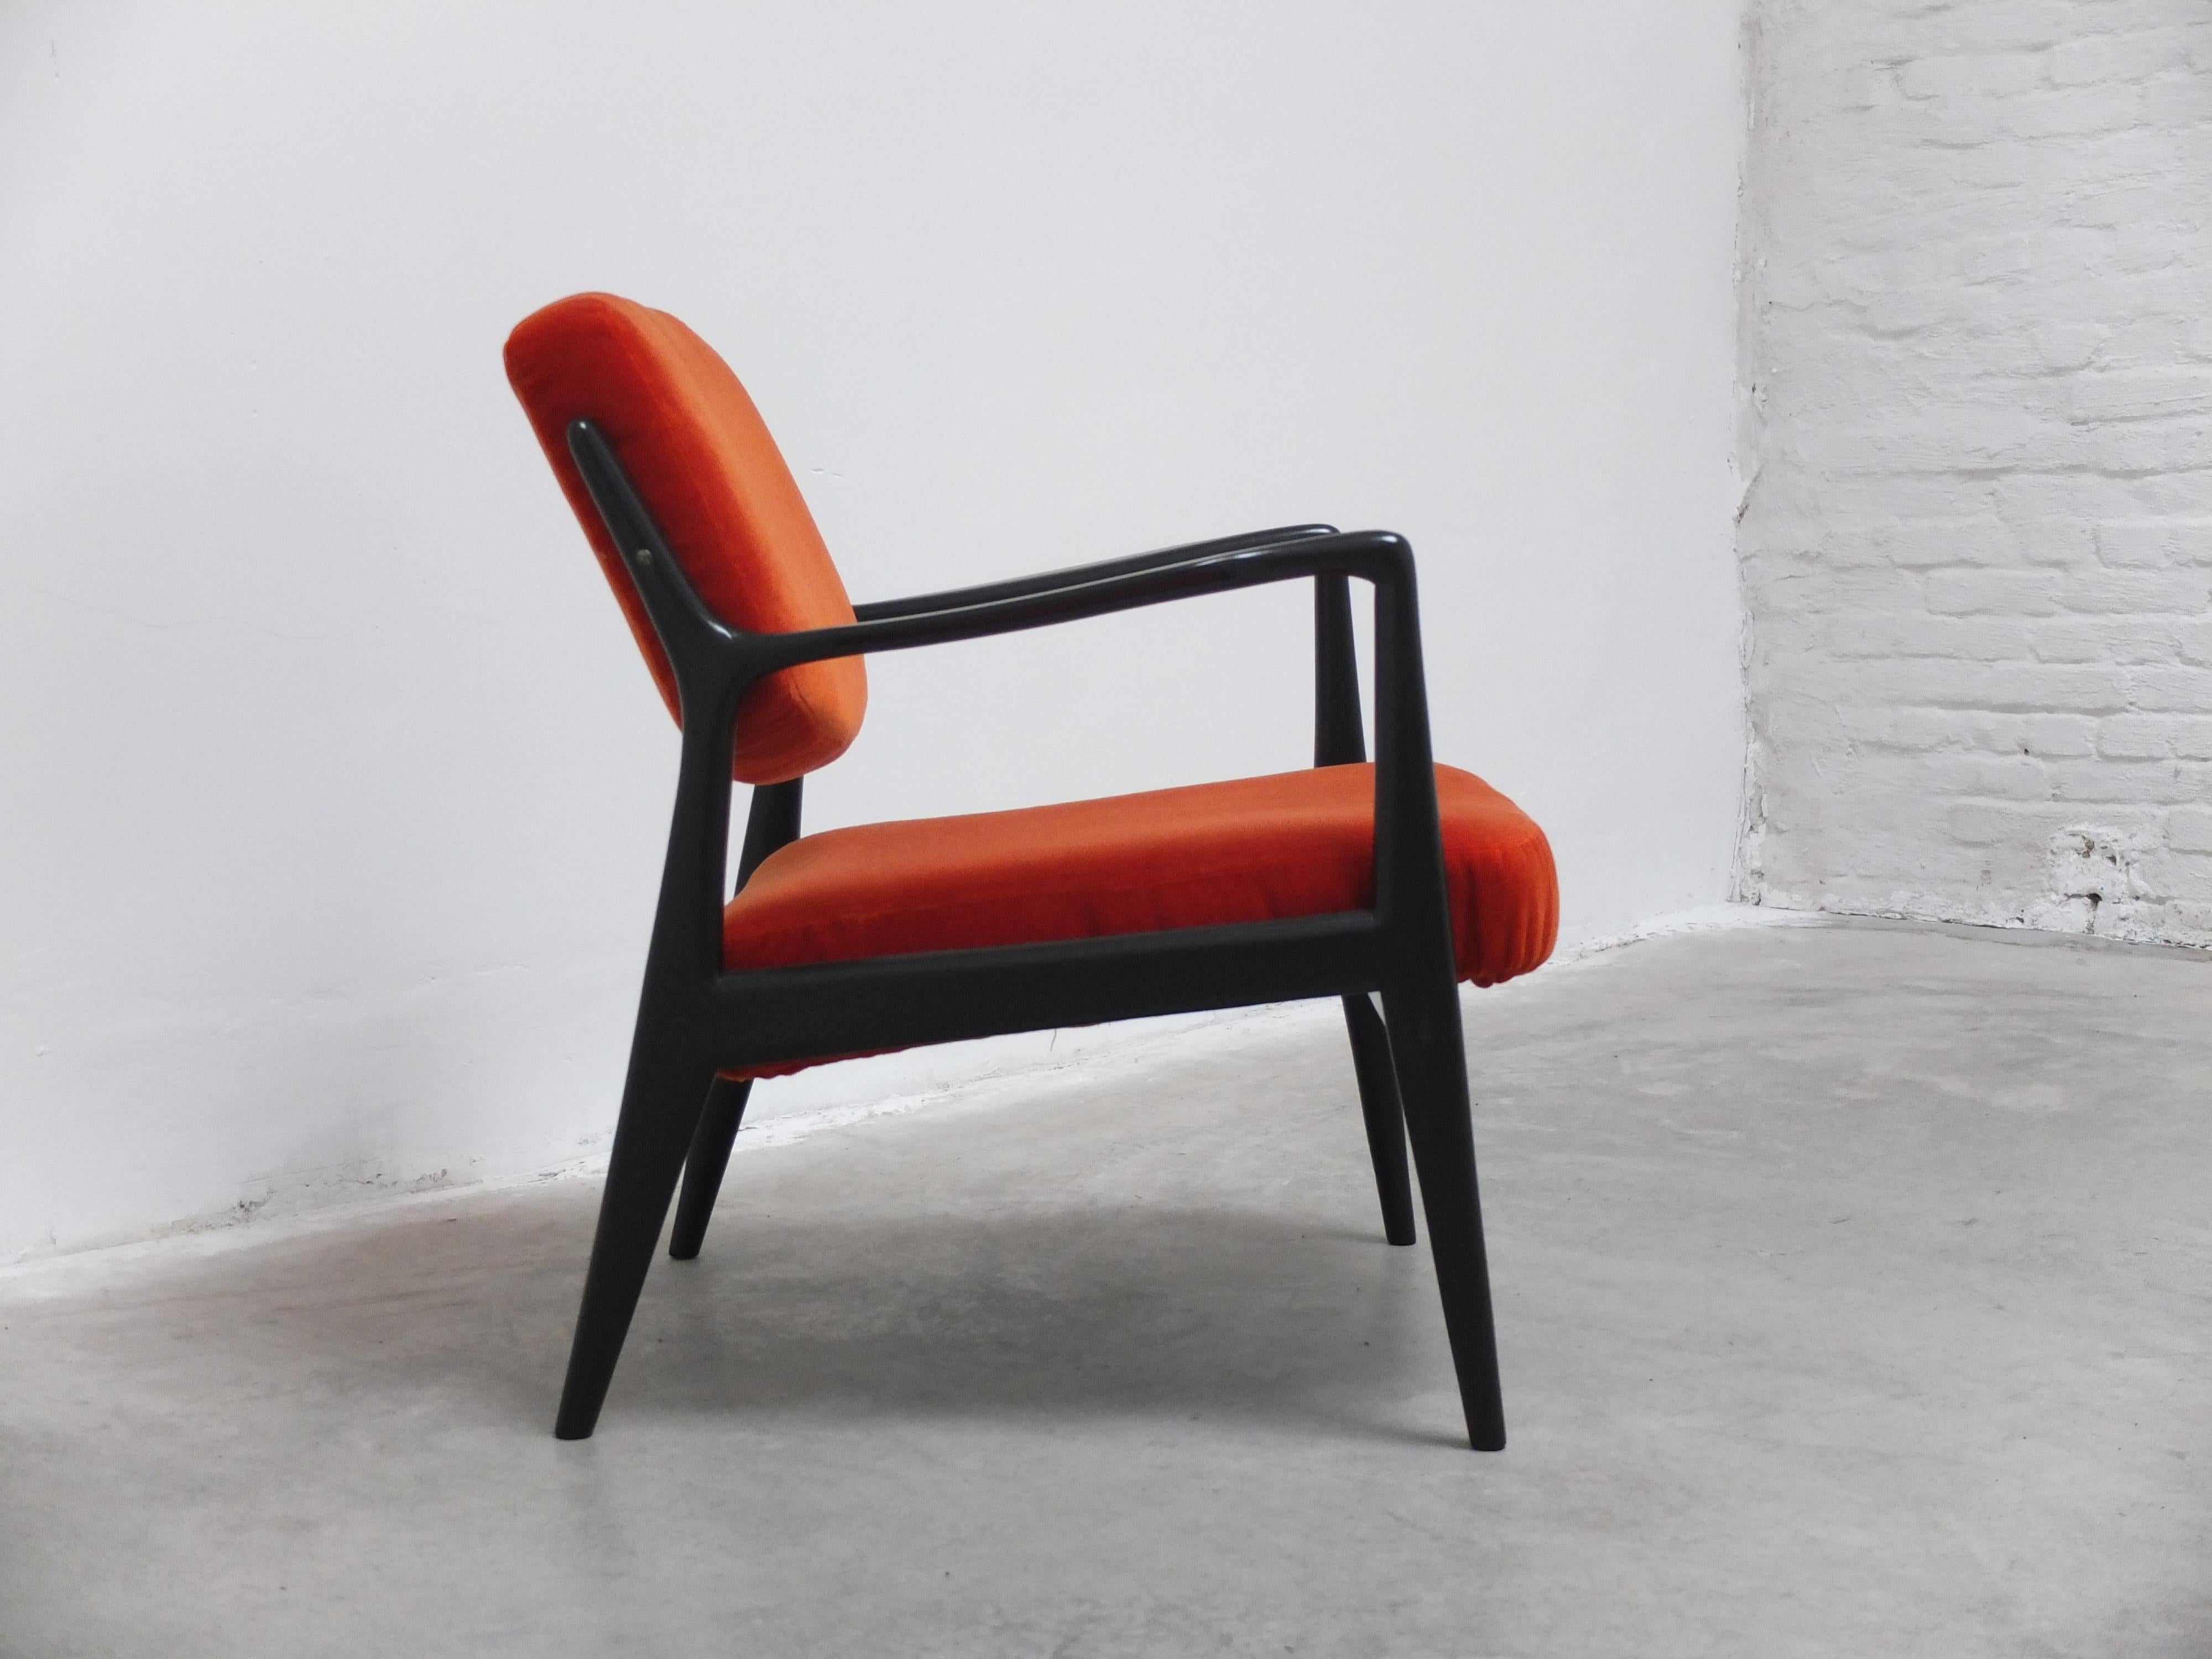 Beautiful lounge chair designed by Belgian modernist designer Alfred Hendrickx for Belform. This chair is from Alfred’s early design period in the 50s where he was clearly inspired by Italian and Scandinavian designers. It was only in the 60s that